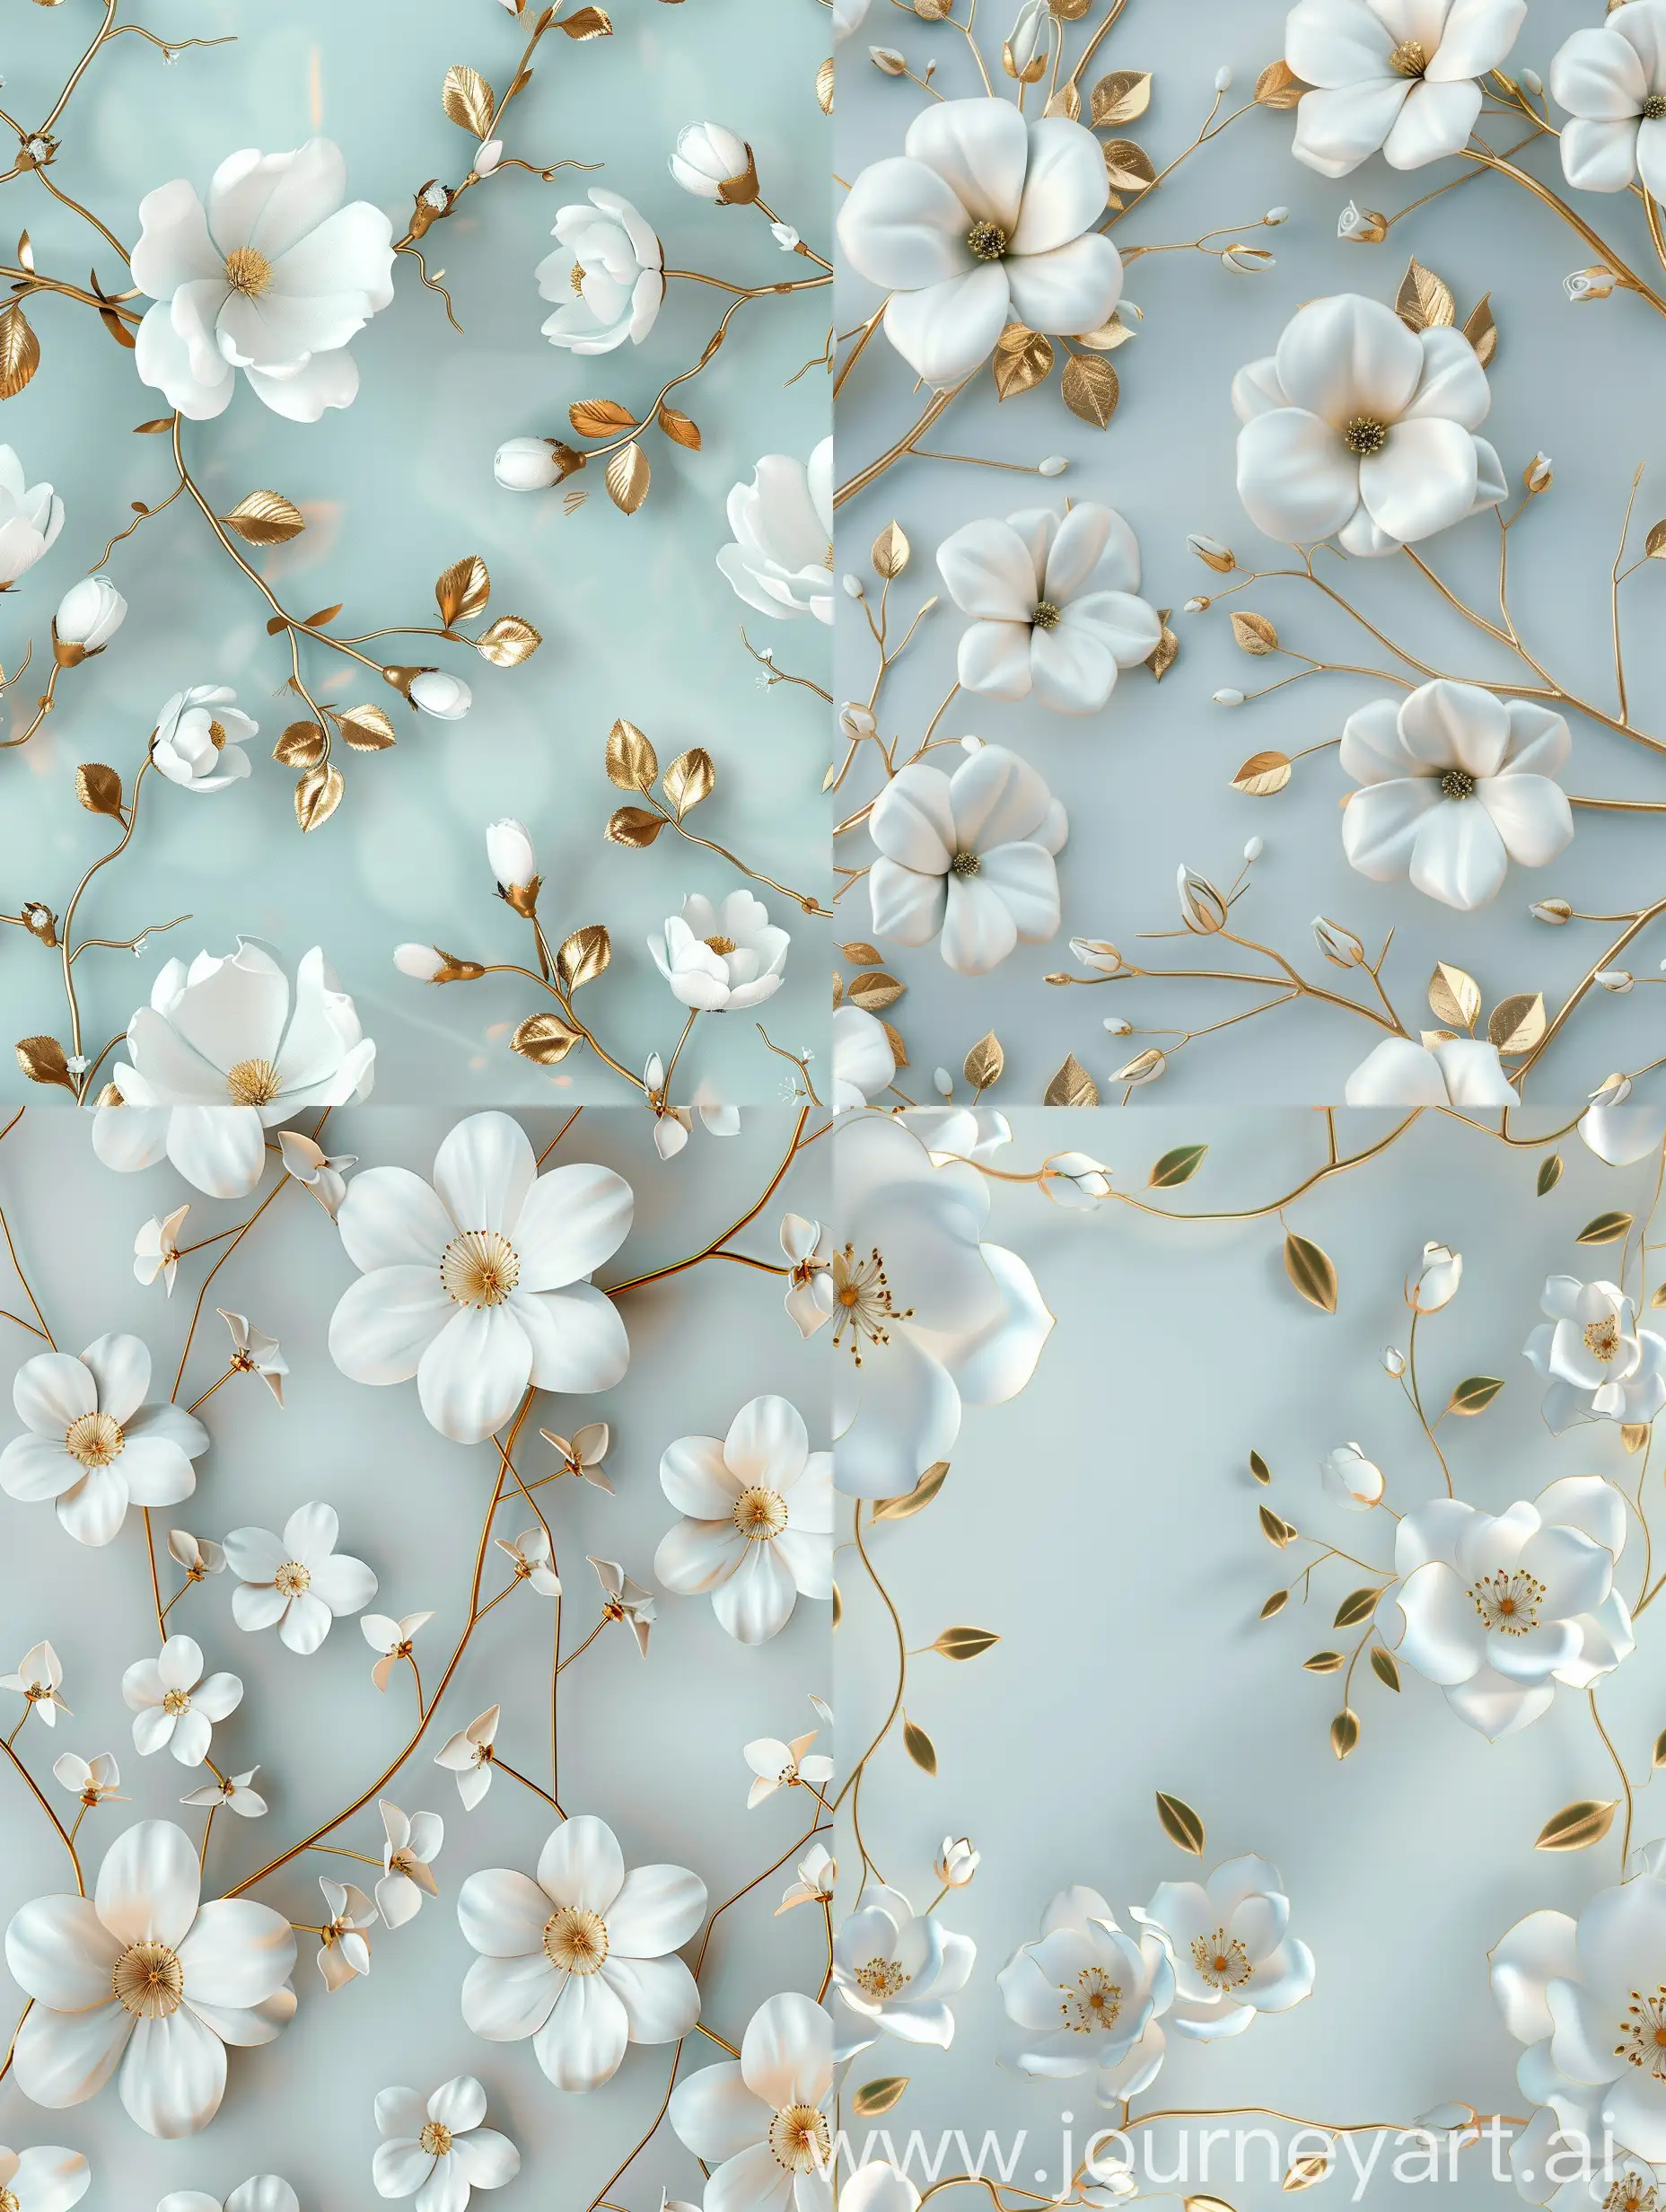 Luxurious-White-Floral-Wallpaper-with-Golden-Branches-on-Pastel-Blue-Background